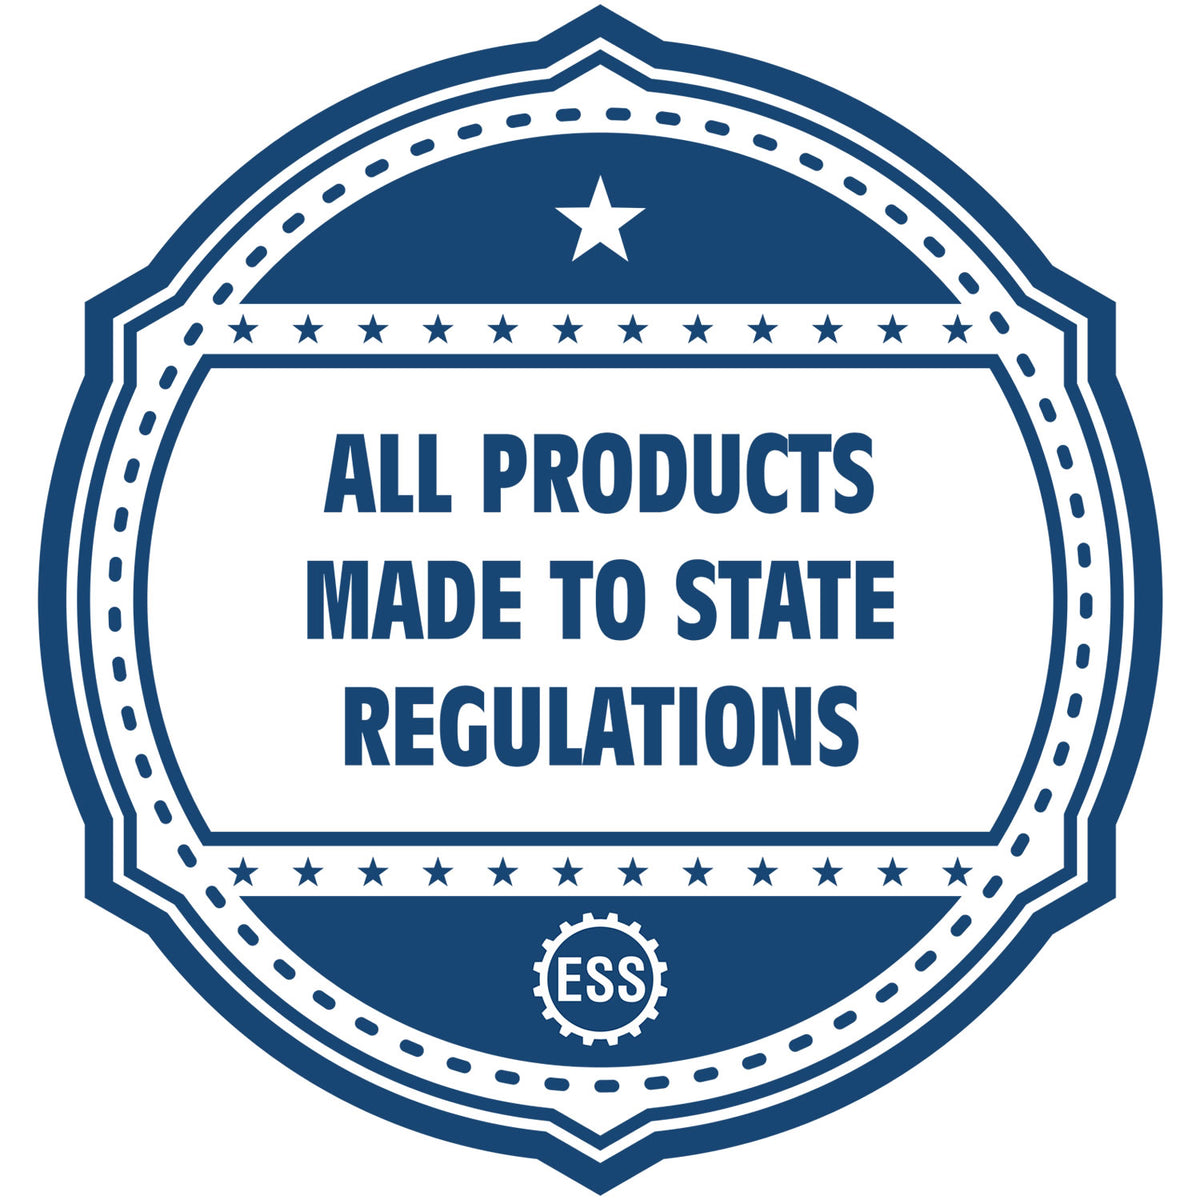 An icon or badge element for the Long Reach Virginia PE Seal showing that this product is made in compliance with state regulations.